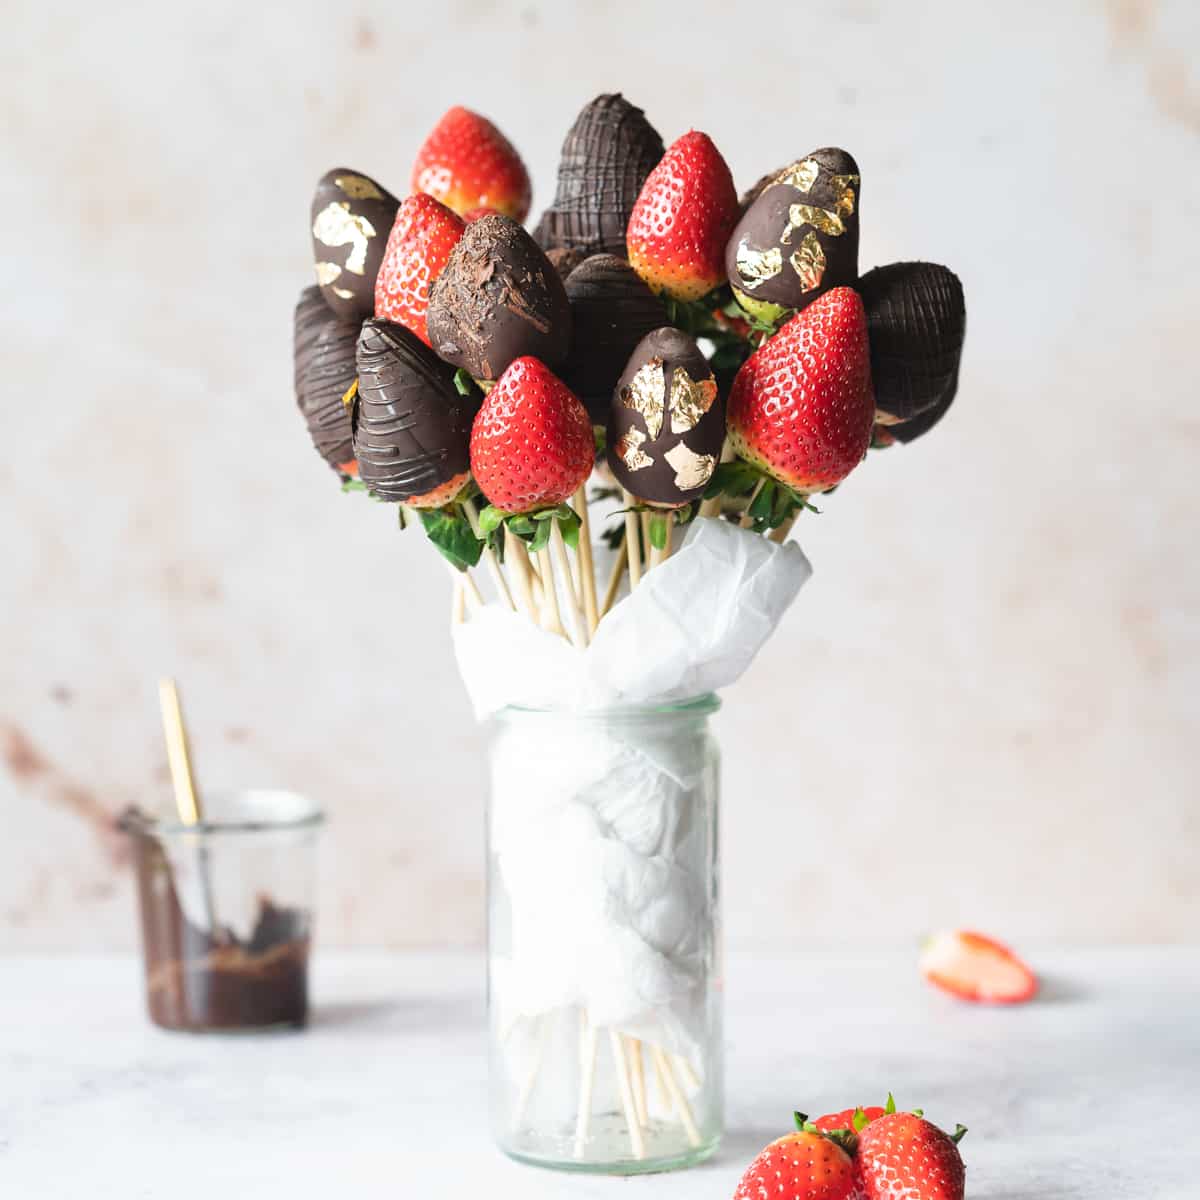 How to make an amazing chocolate bouquet in a box. DIY, chocolate bouquet  gift 